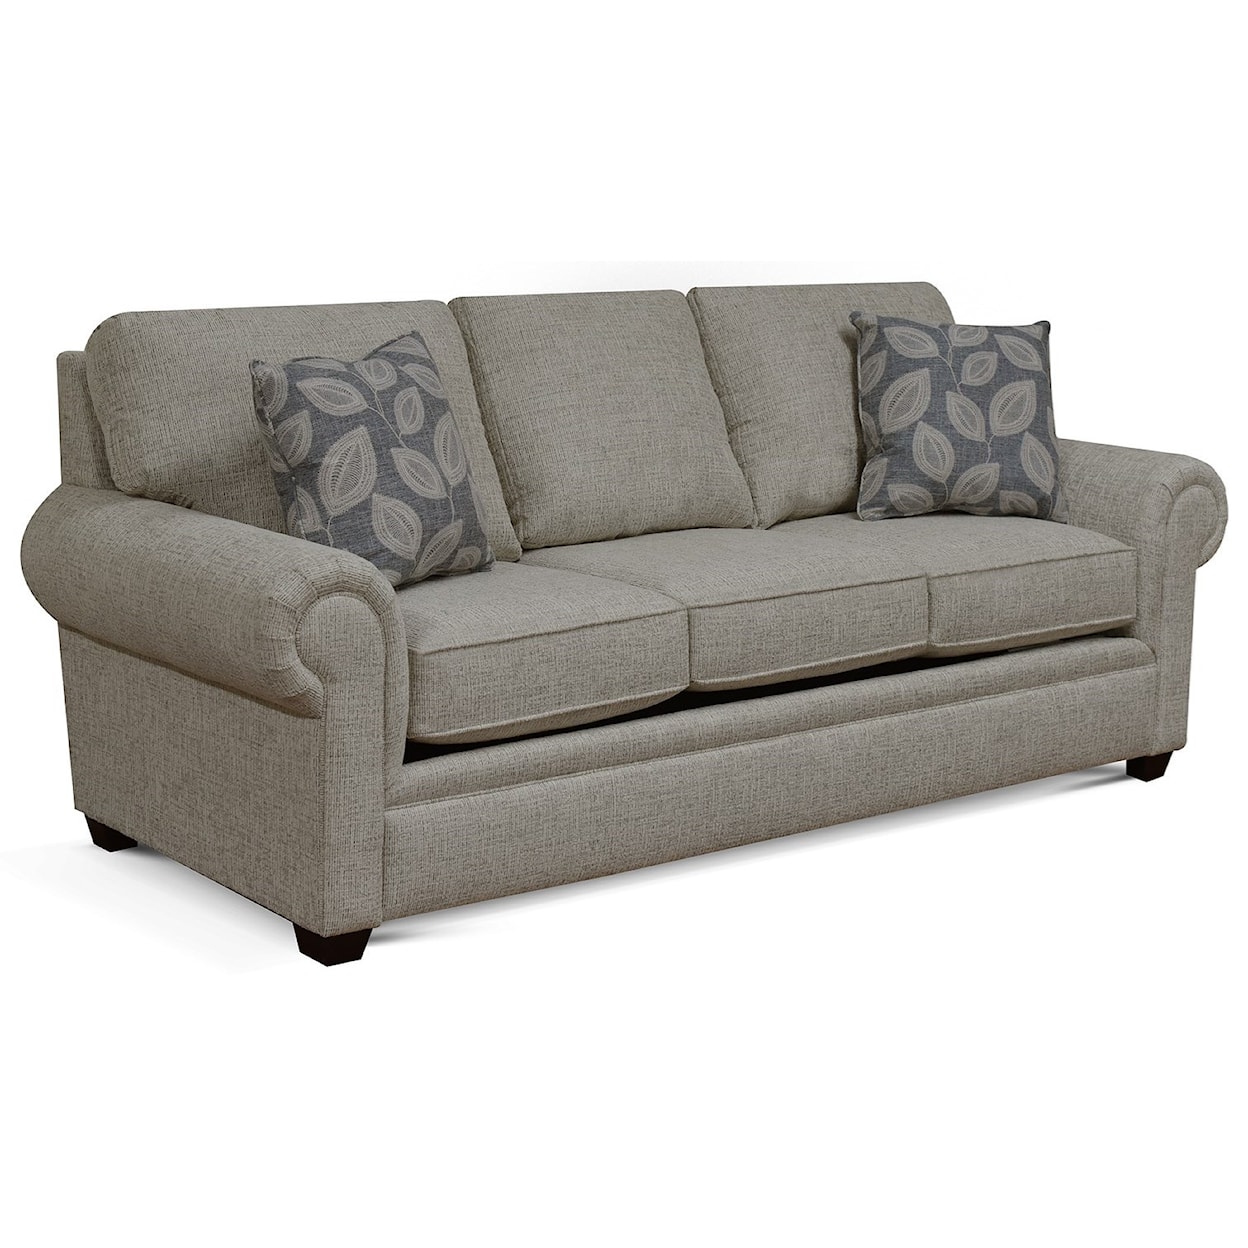 England 2250/N Series 2255 8429 Rolled Arm Sofa with Exposed Block Legs ...